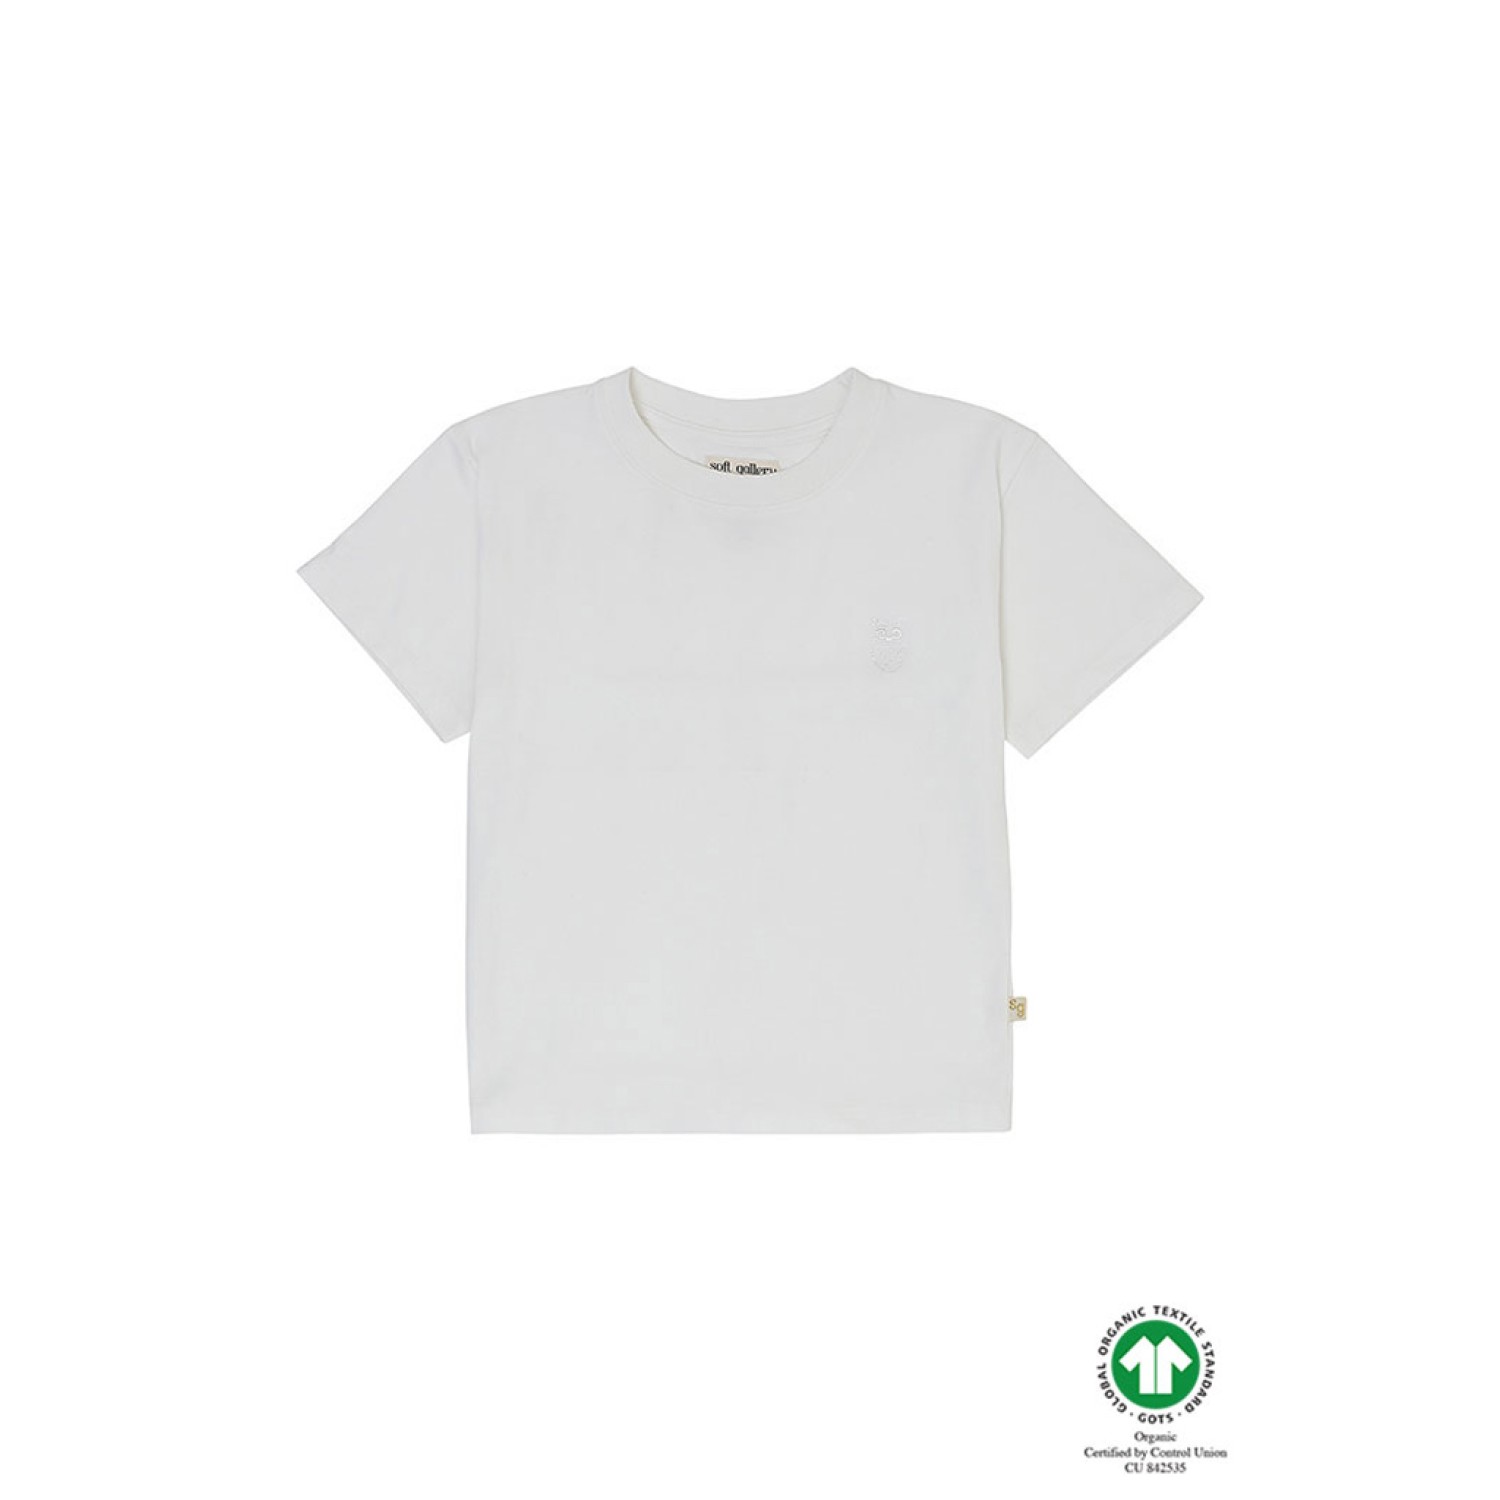 Asger T-shirt  White SOFT GALLERY